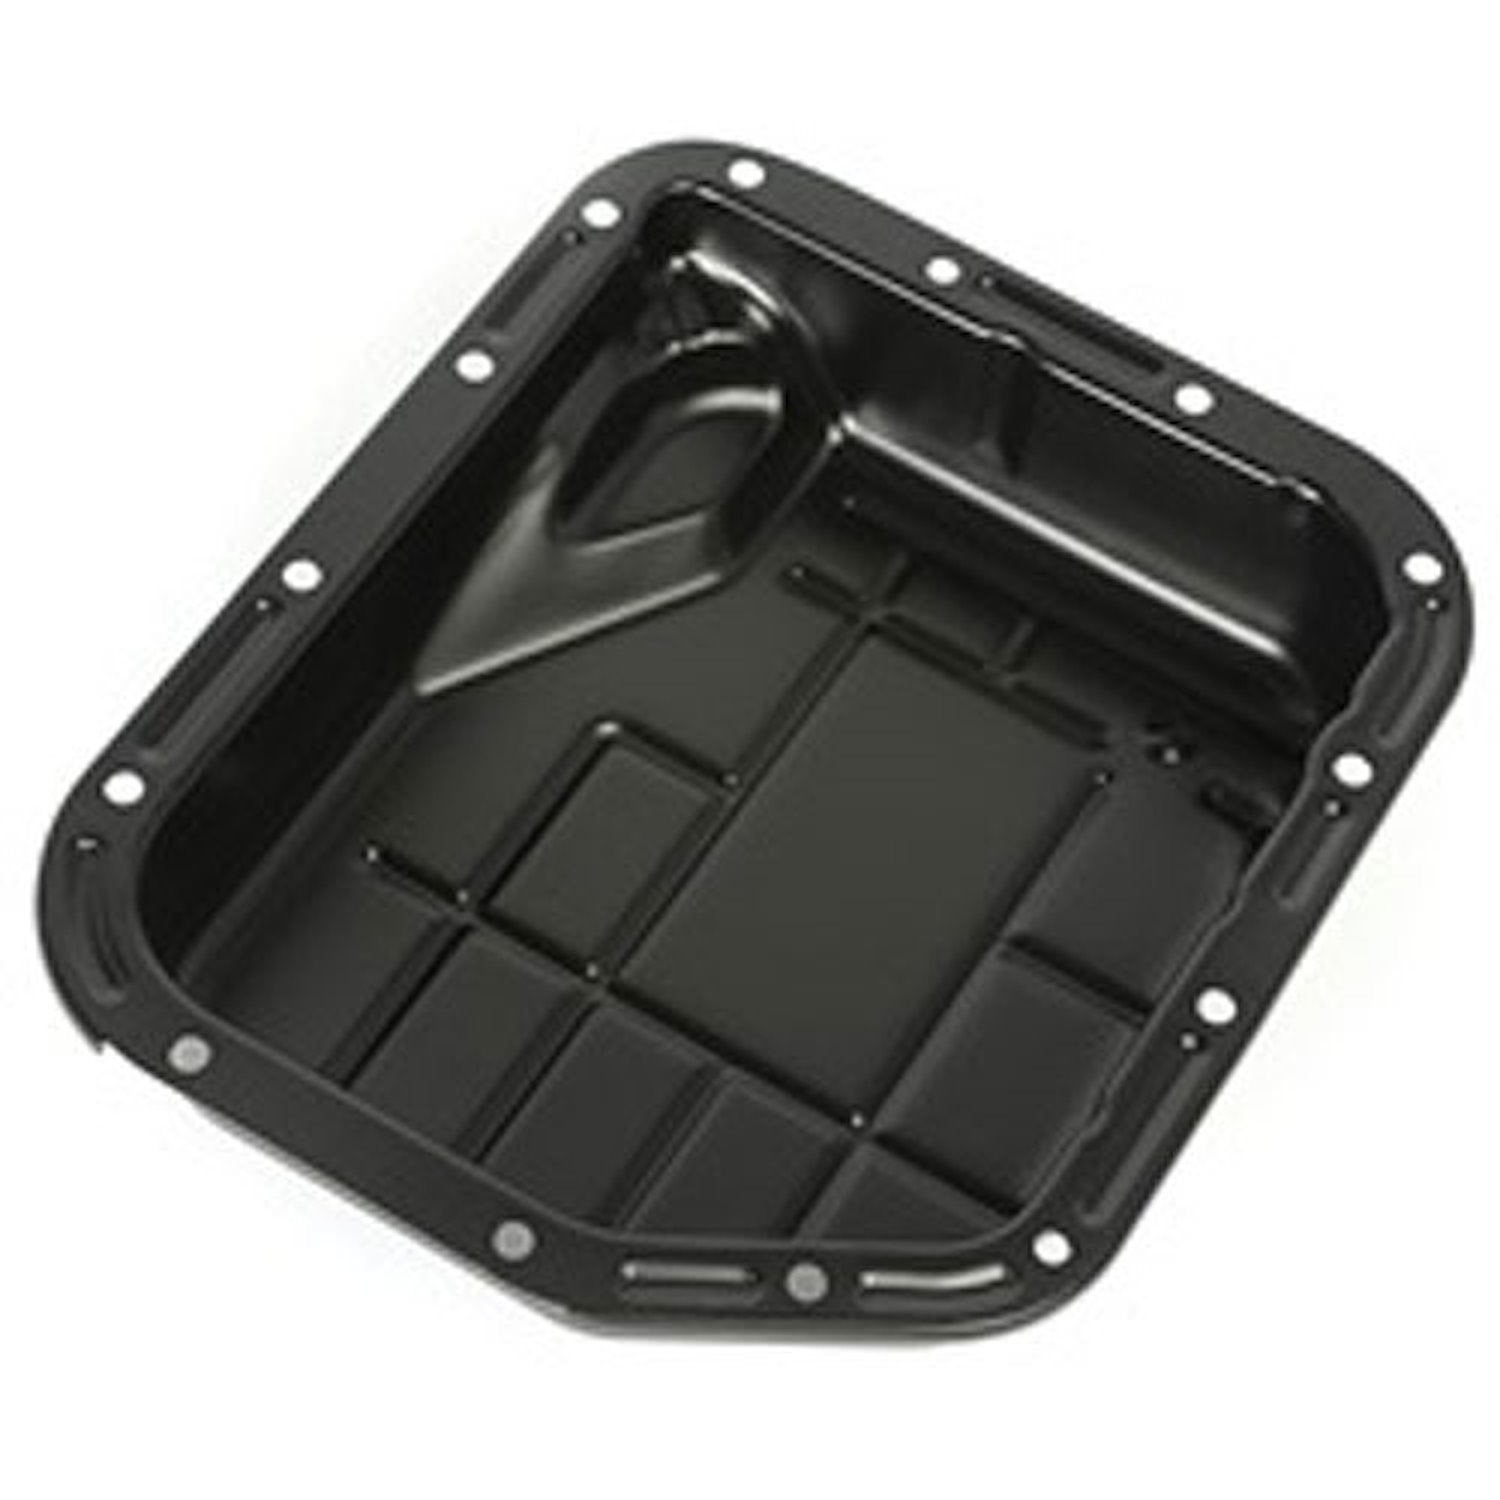 This transmission pan from Omix-ADA fits 42RE automatic transmissions found in 98-04 Jeep Grand Cherokees.